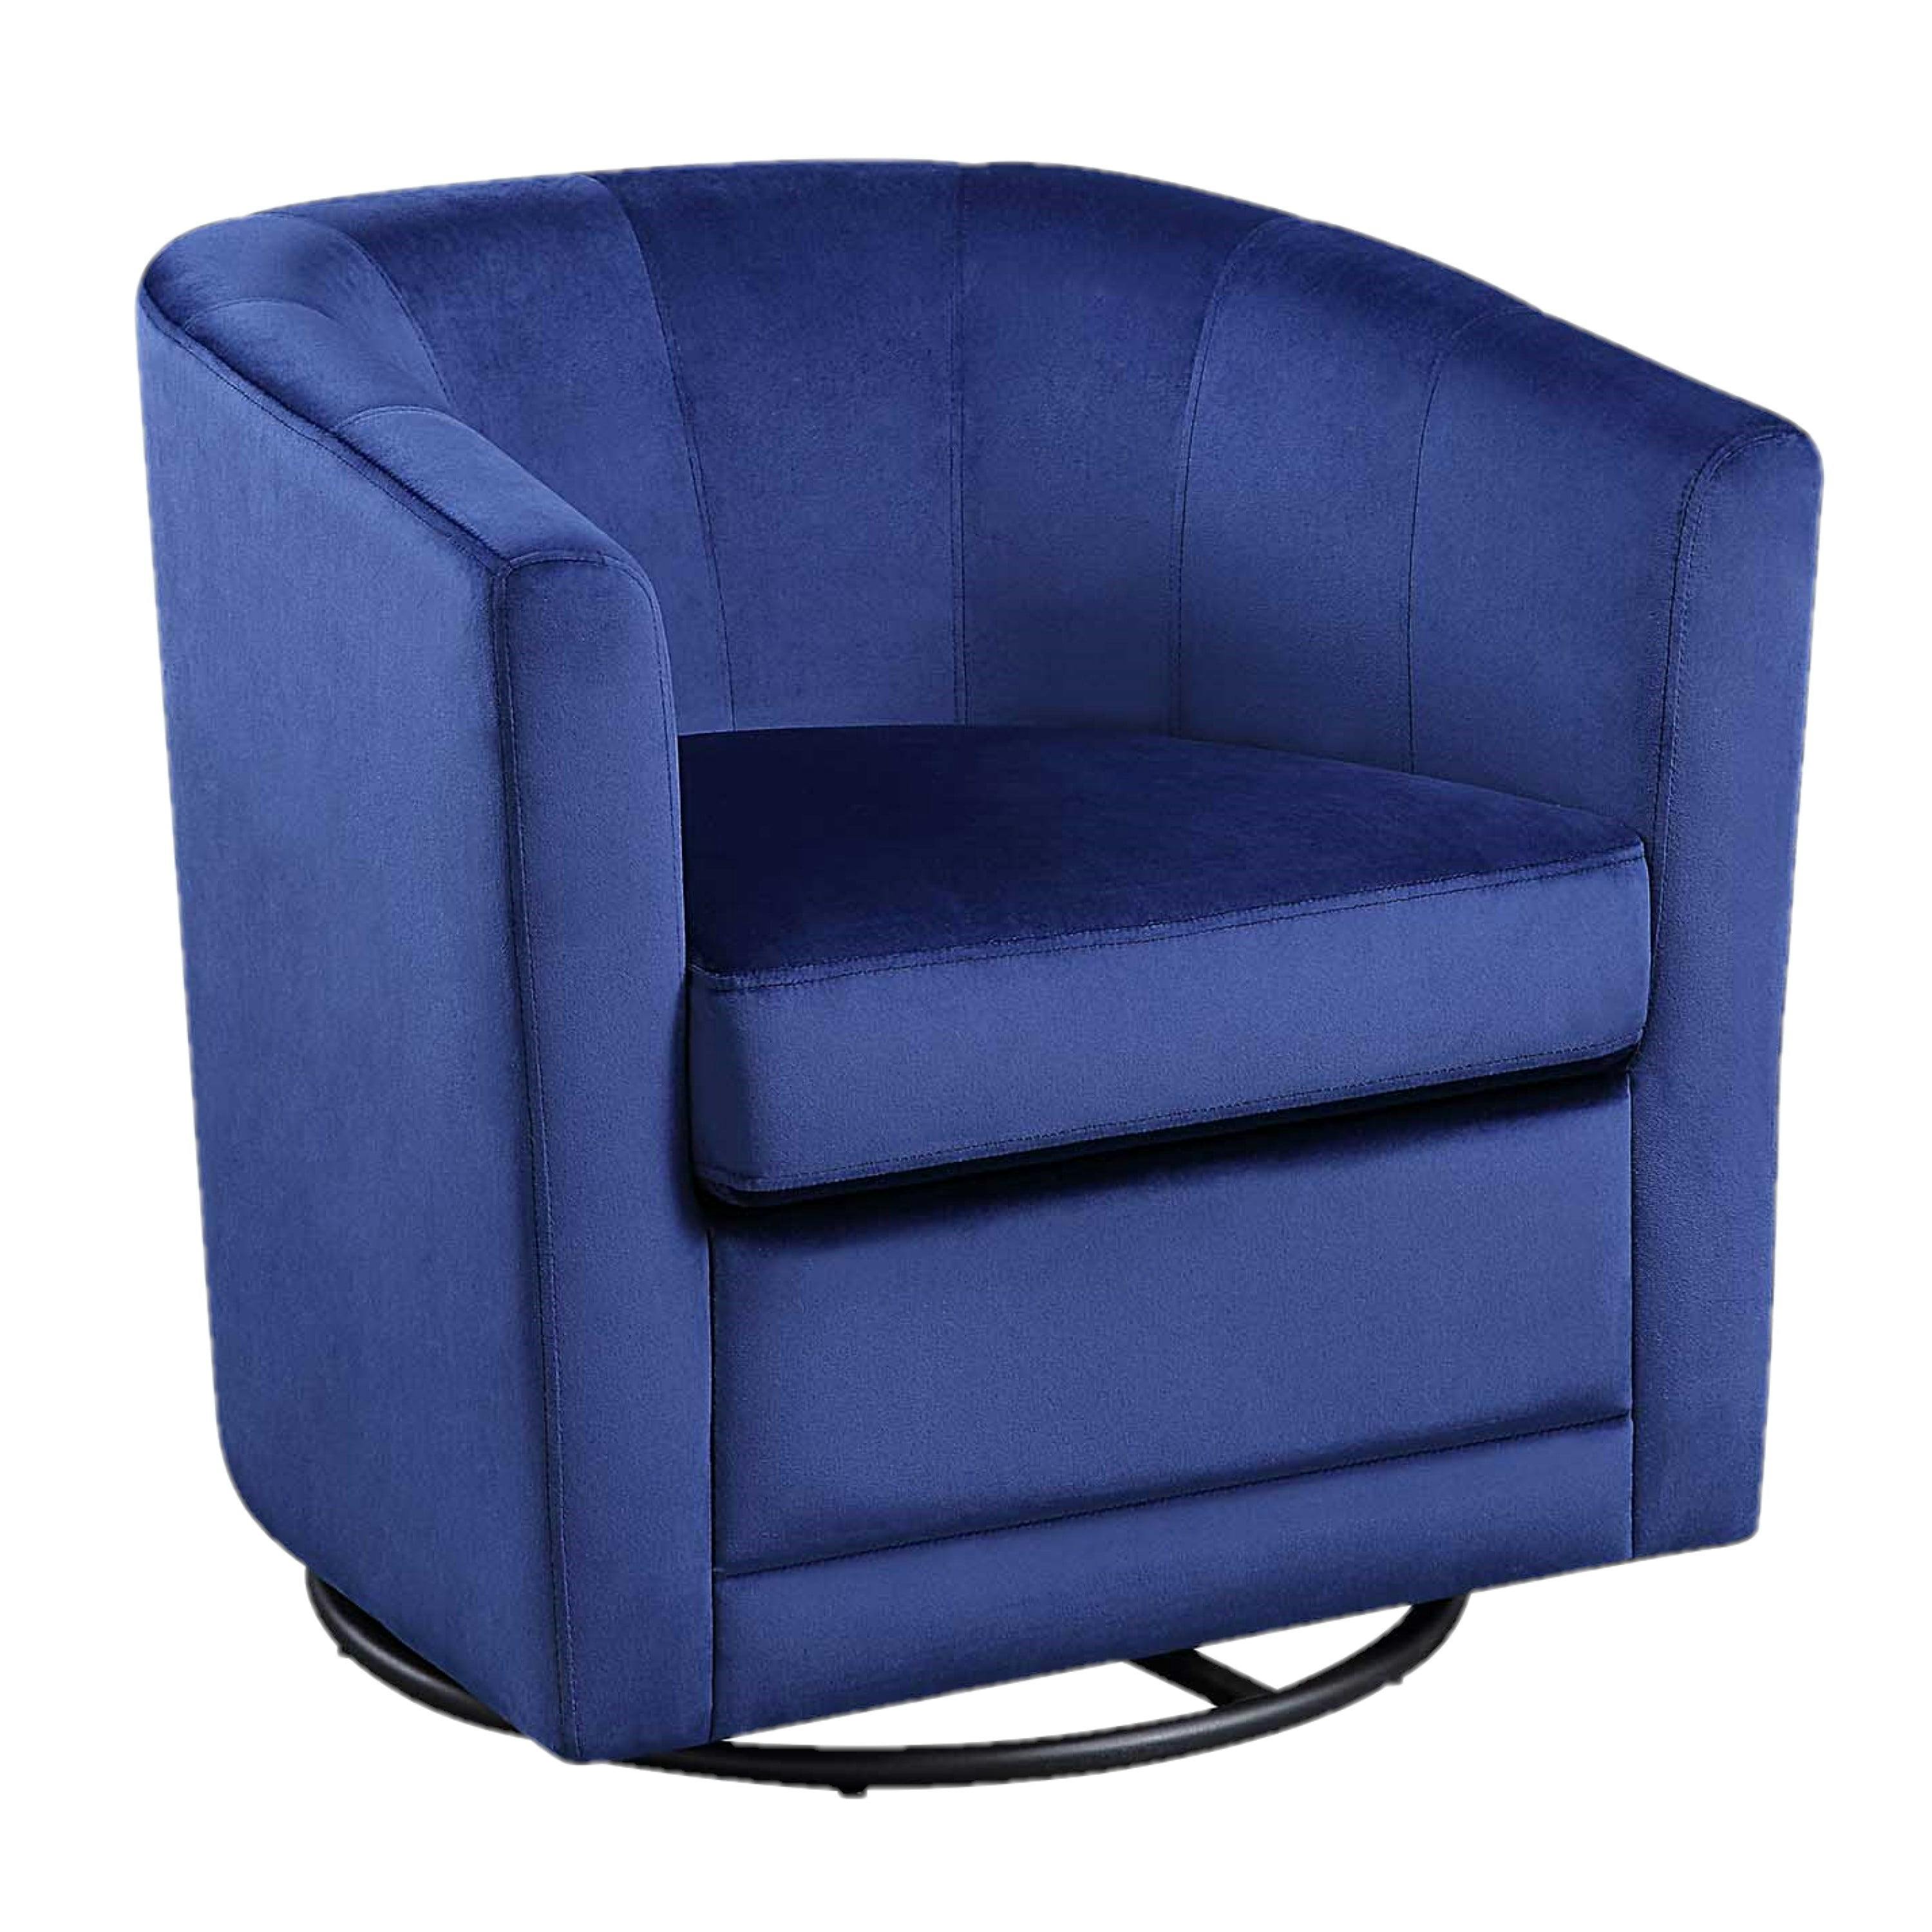 Blue Velvet Barrel Swivel Chair with Wooden Accents